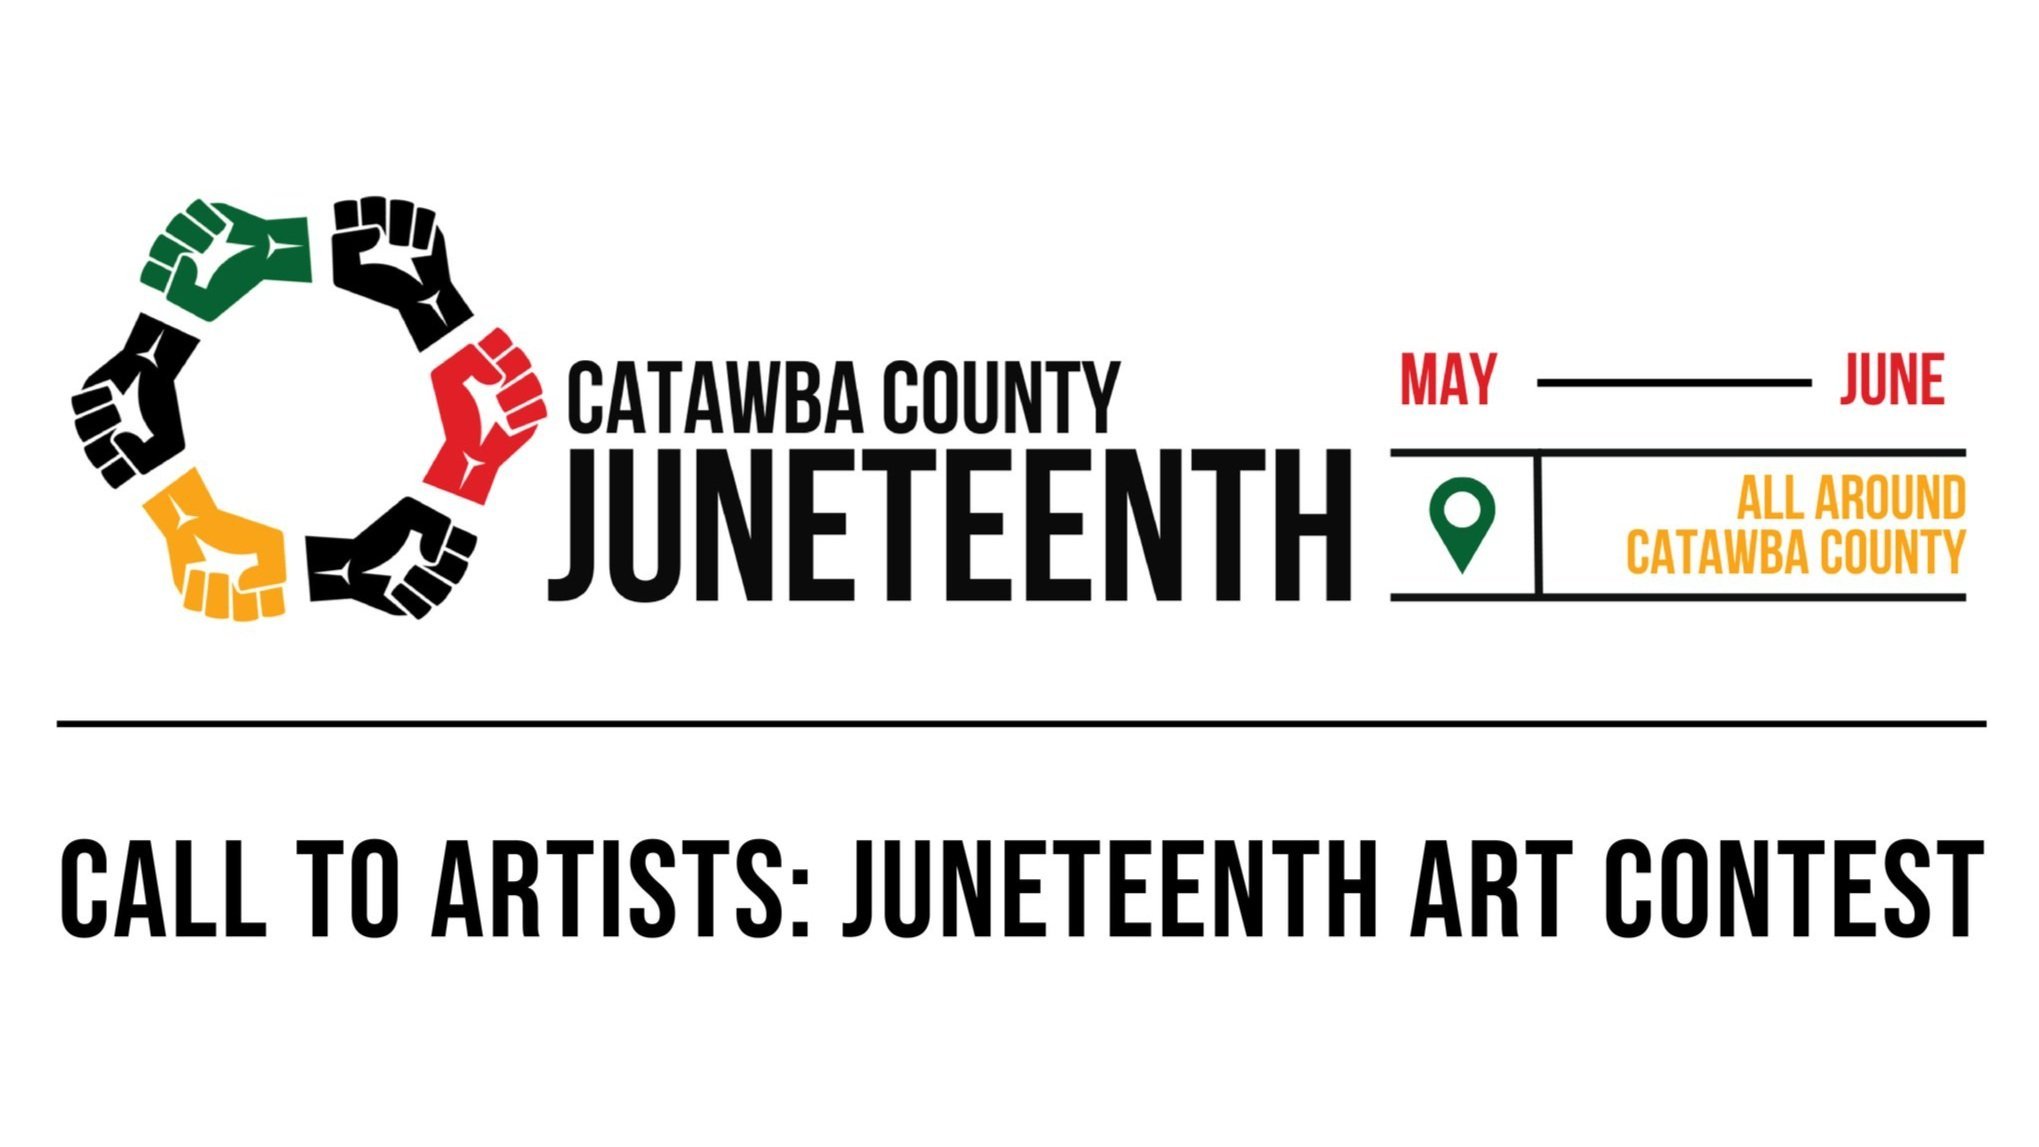 In celebration and collaboration with our Juneteenth Opening Night event on May 30,  HMA is holding an art contest with the Juneteenth Collaborative of Catawba County. Join us in honoring Juneteenth through the power of art, as we celebrate freedom a